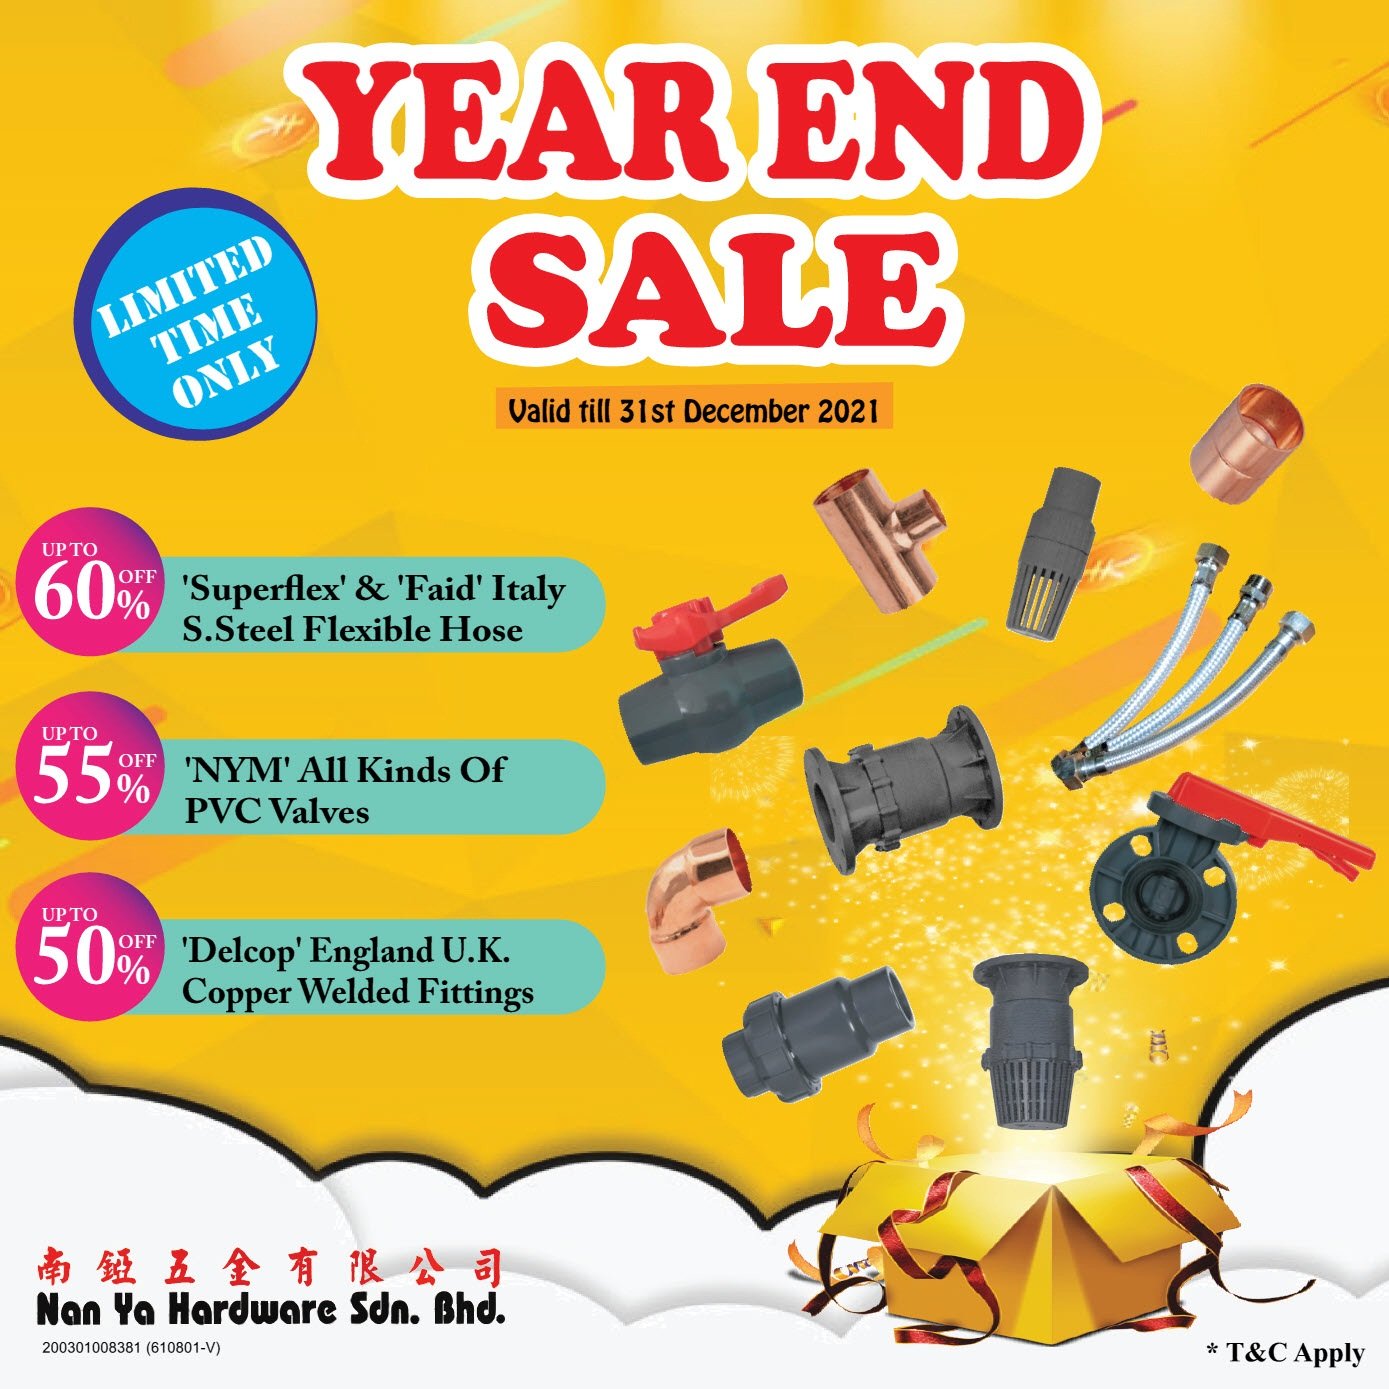 YEAR END SALE 2021